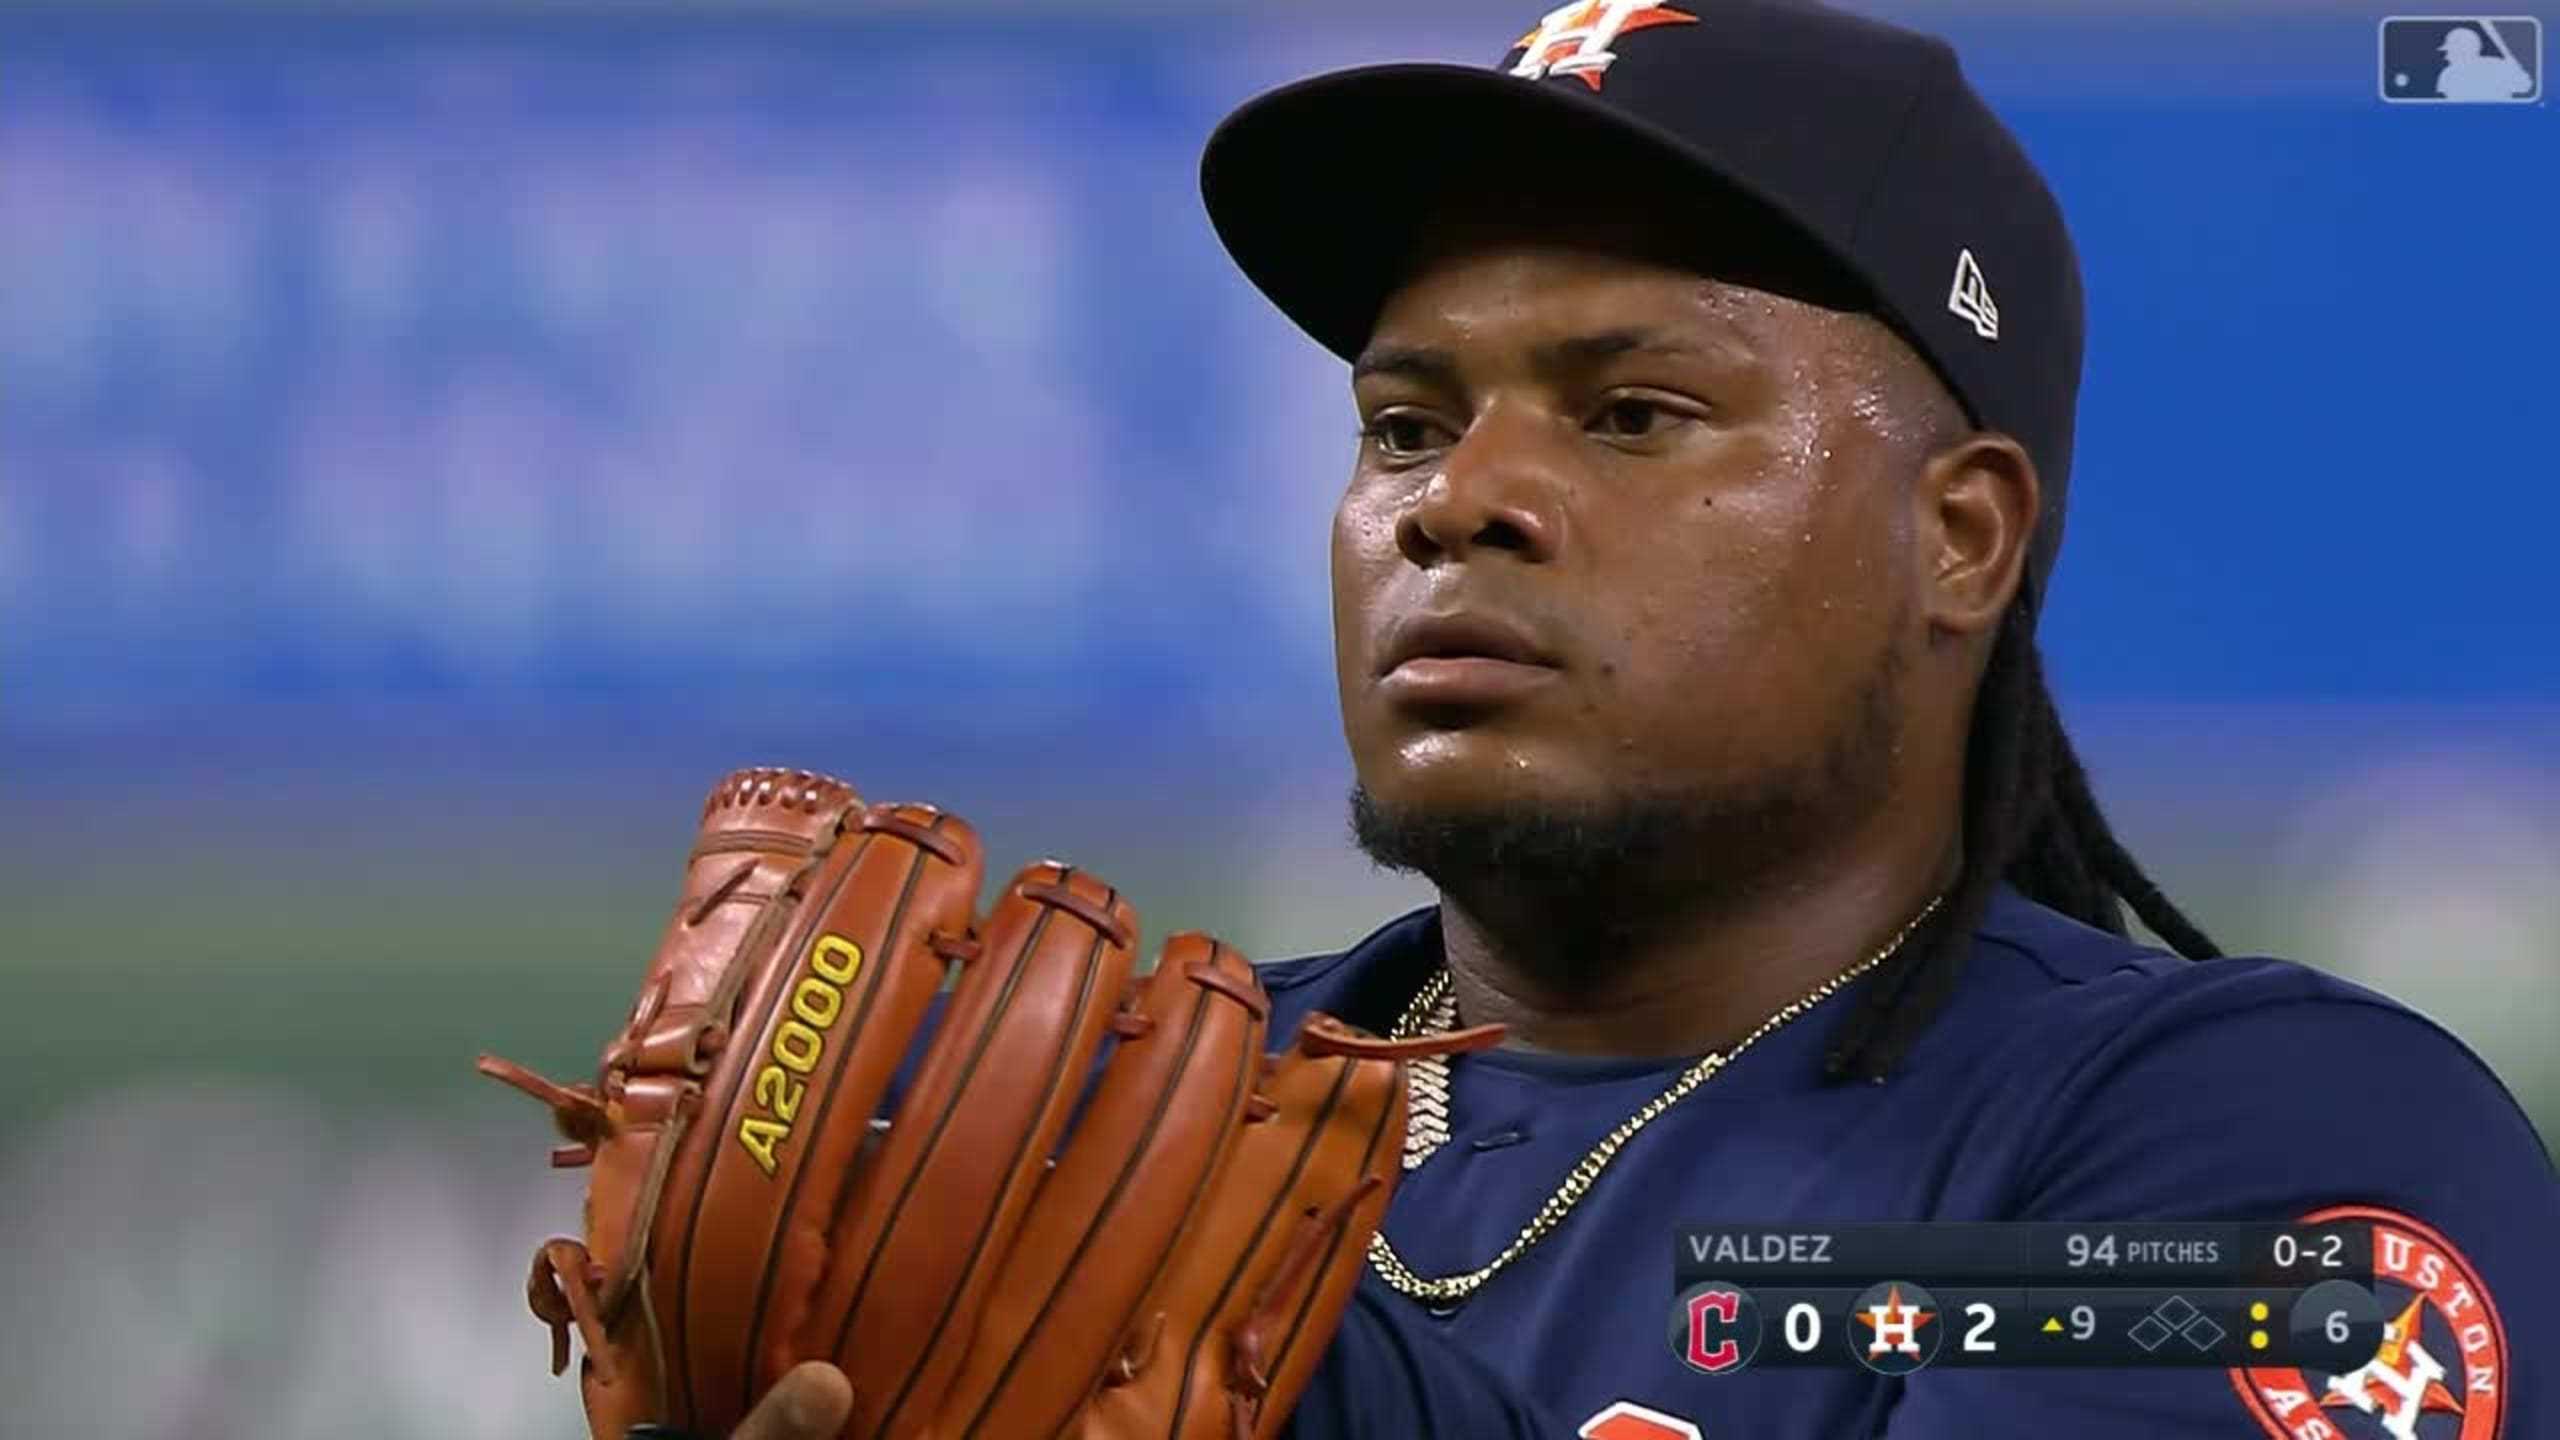 Framber Valdez no-hitter: Astros ace shuts down Guardians for 16th